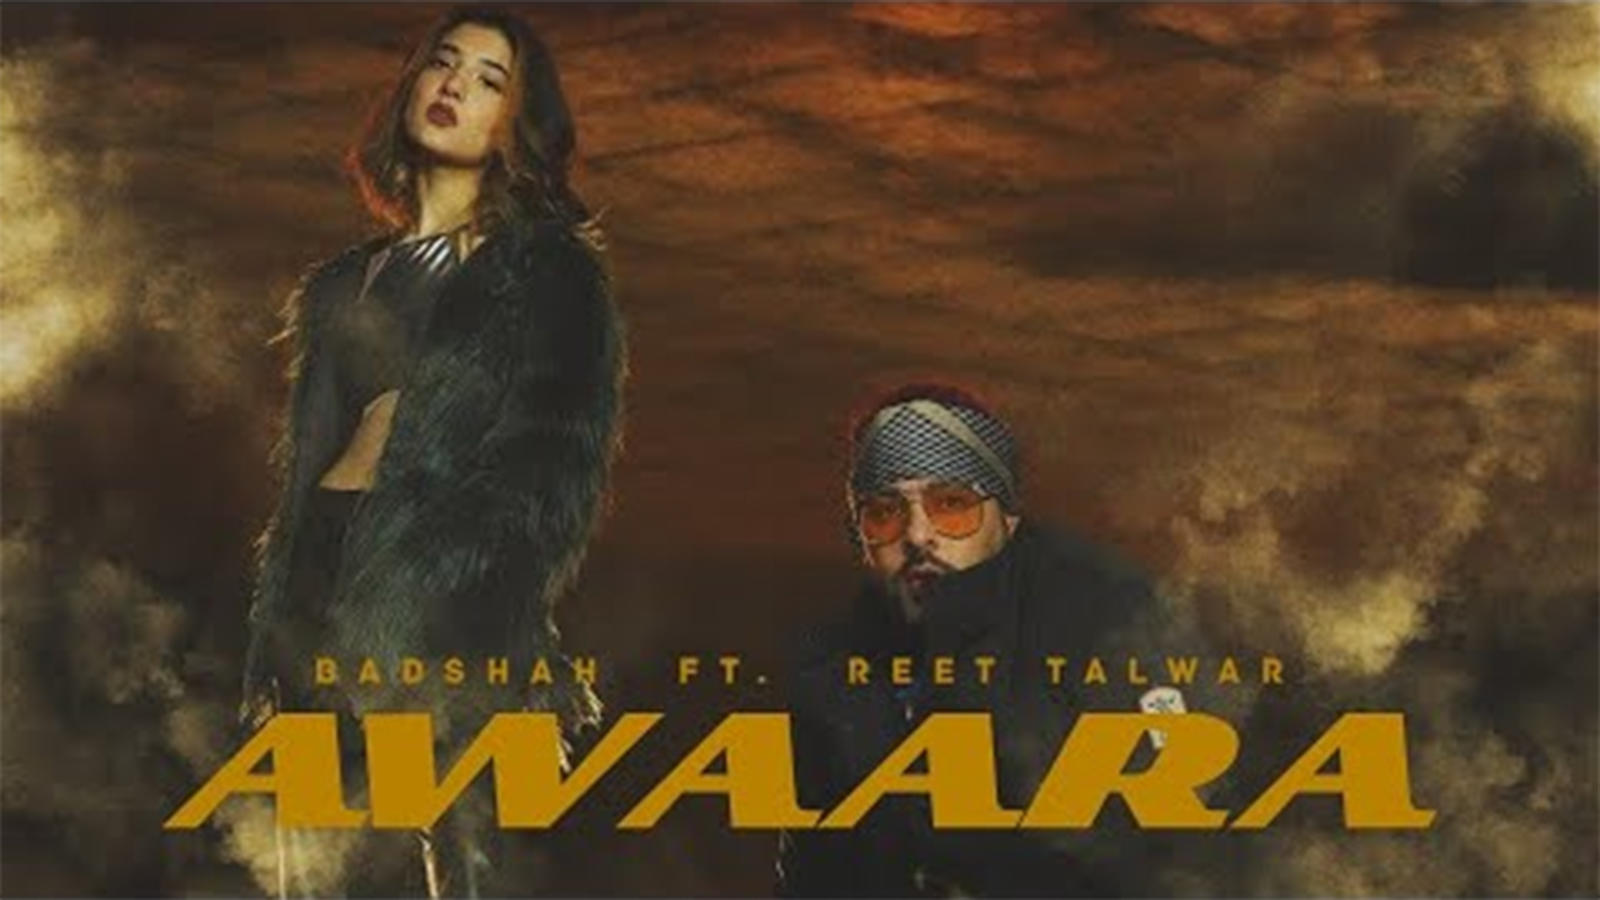 Check Out Latest Hindi Official Music Video Song 'Awaara' Sung By Badshah  Featuring Reet Talwar | Hindi Video Songs - Times of India